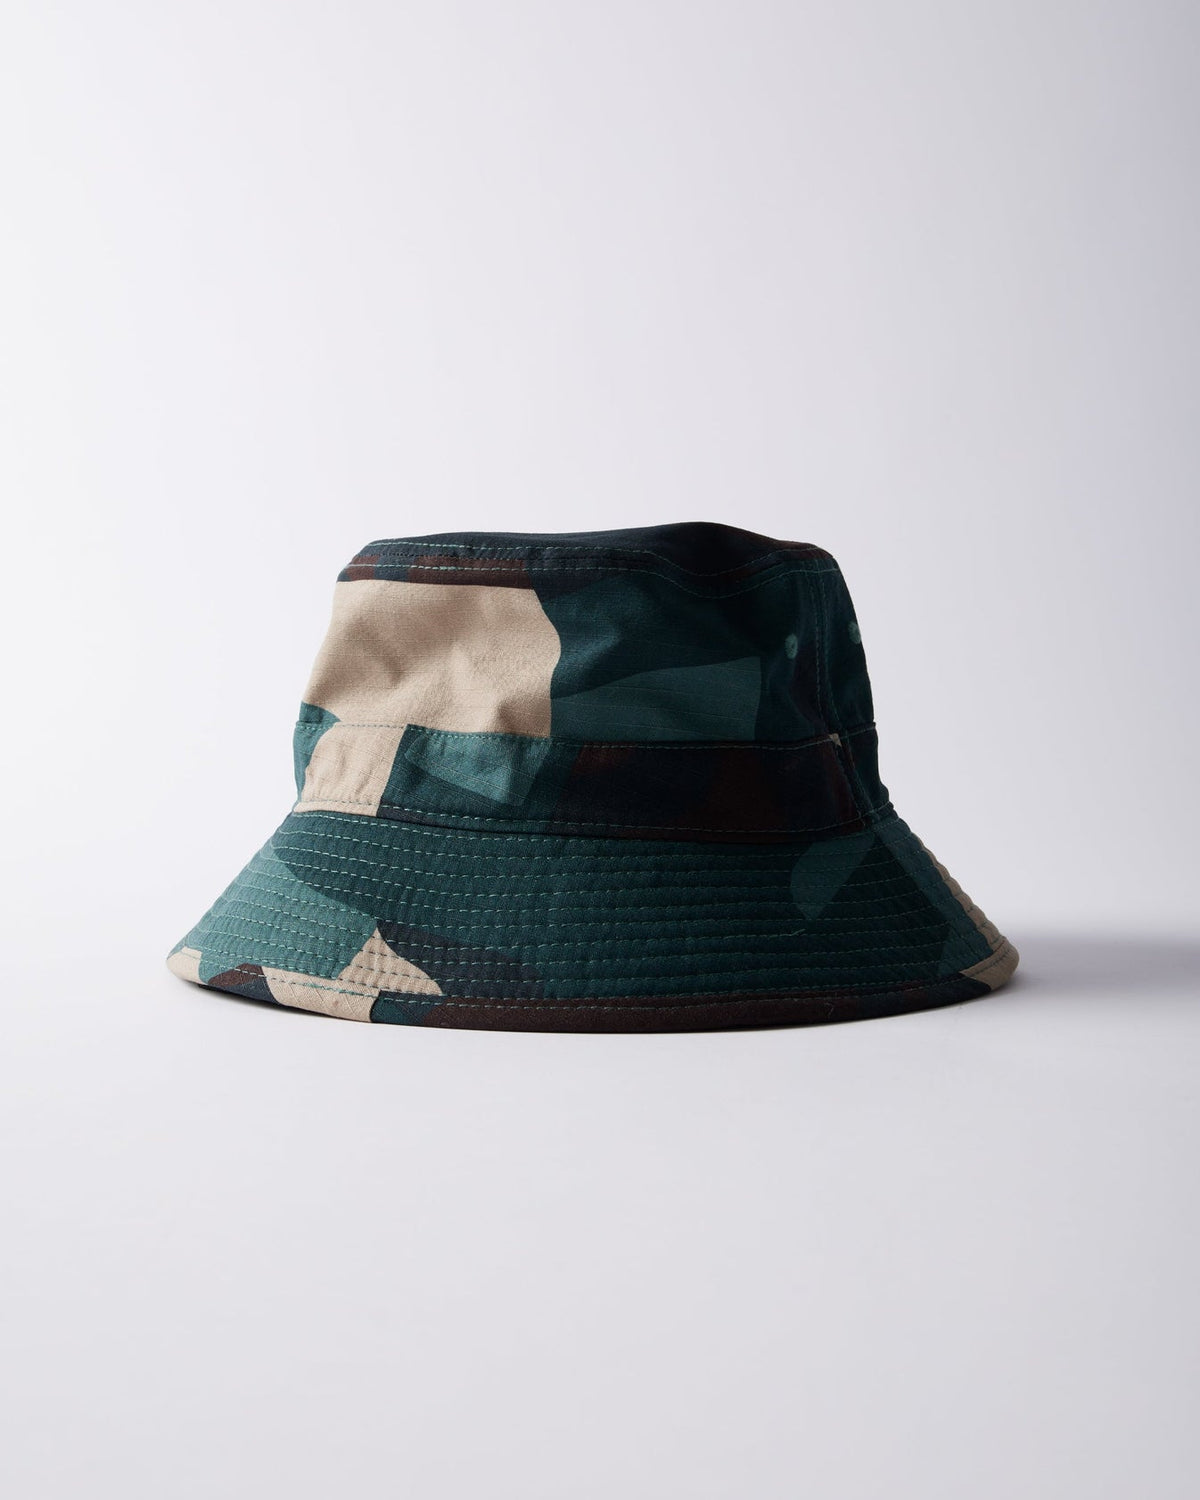 BY PARRA PEACE AND SUN SAFARI HAT